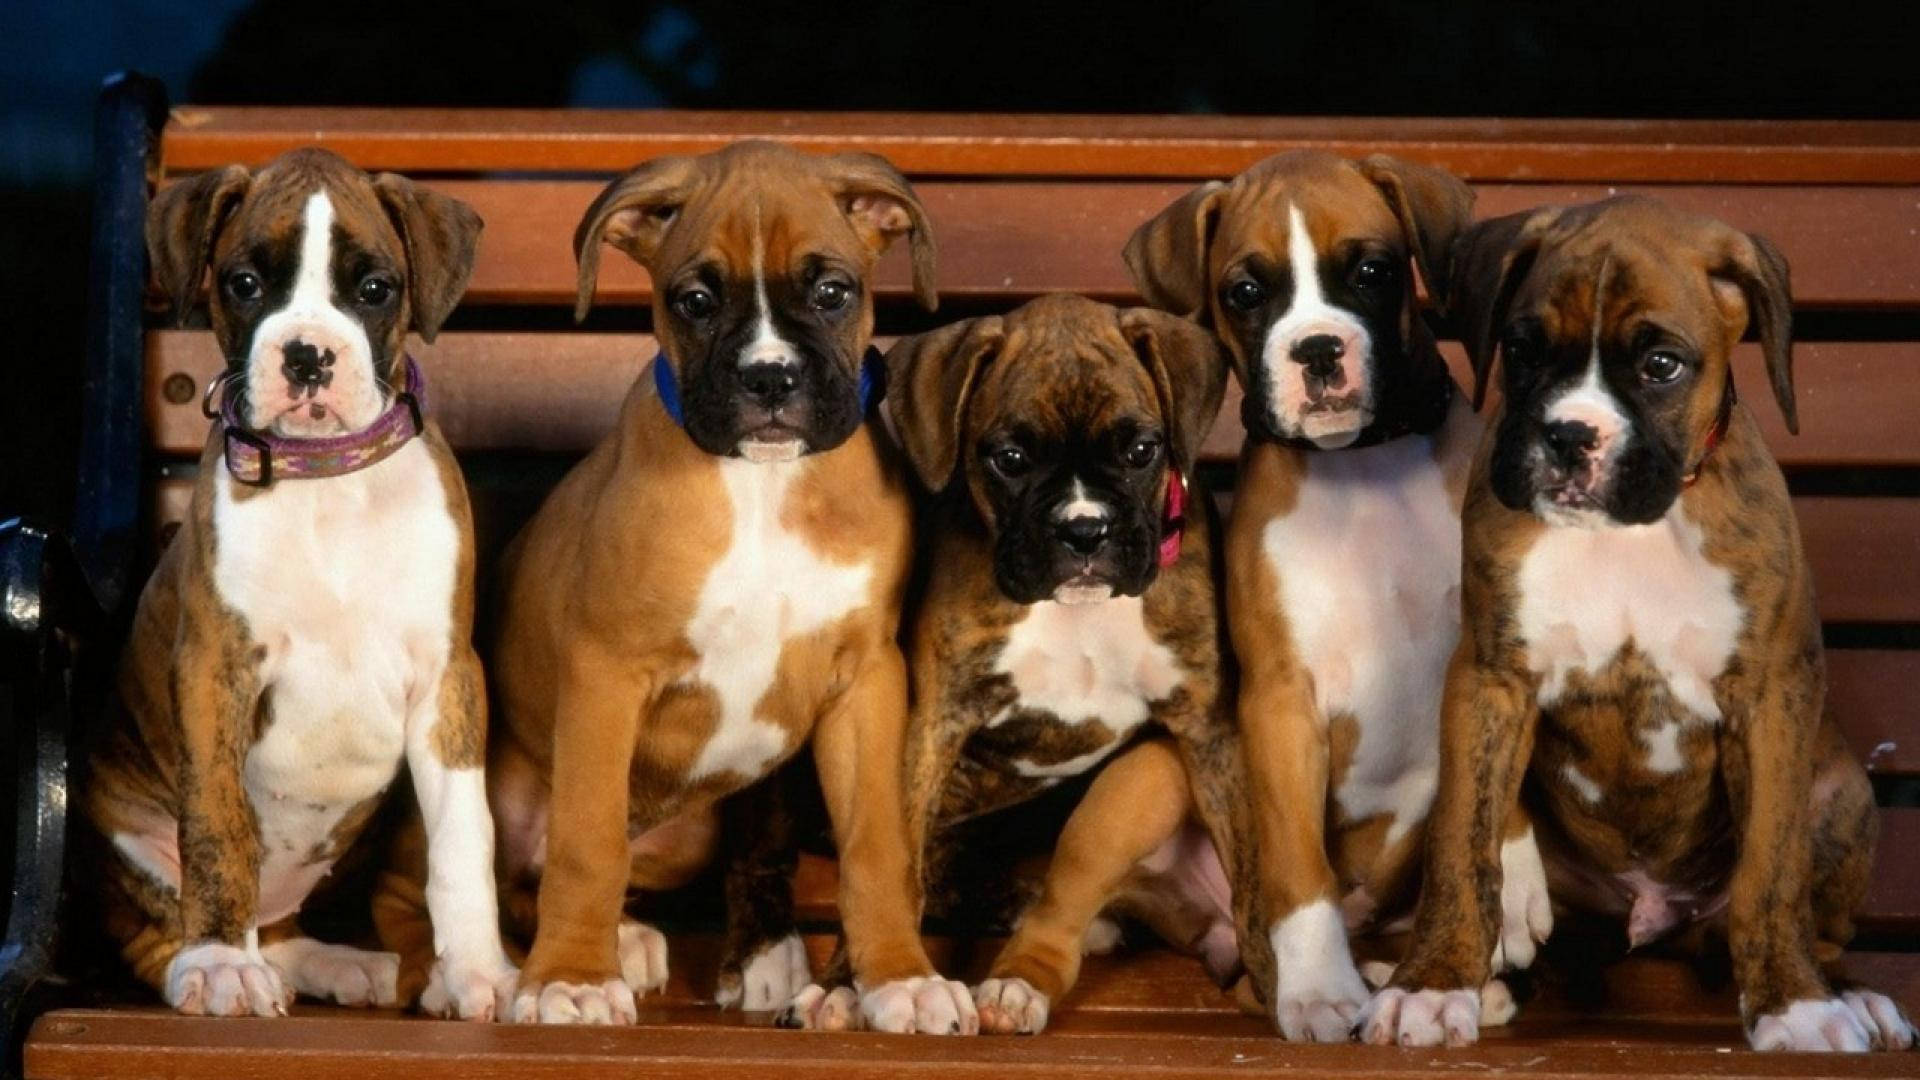 Adorable Boxer Puppies Sitting on a Bench Wallpaper